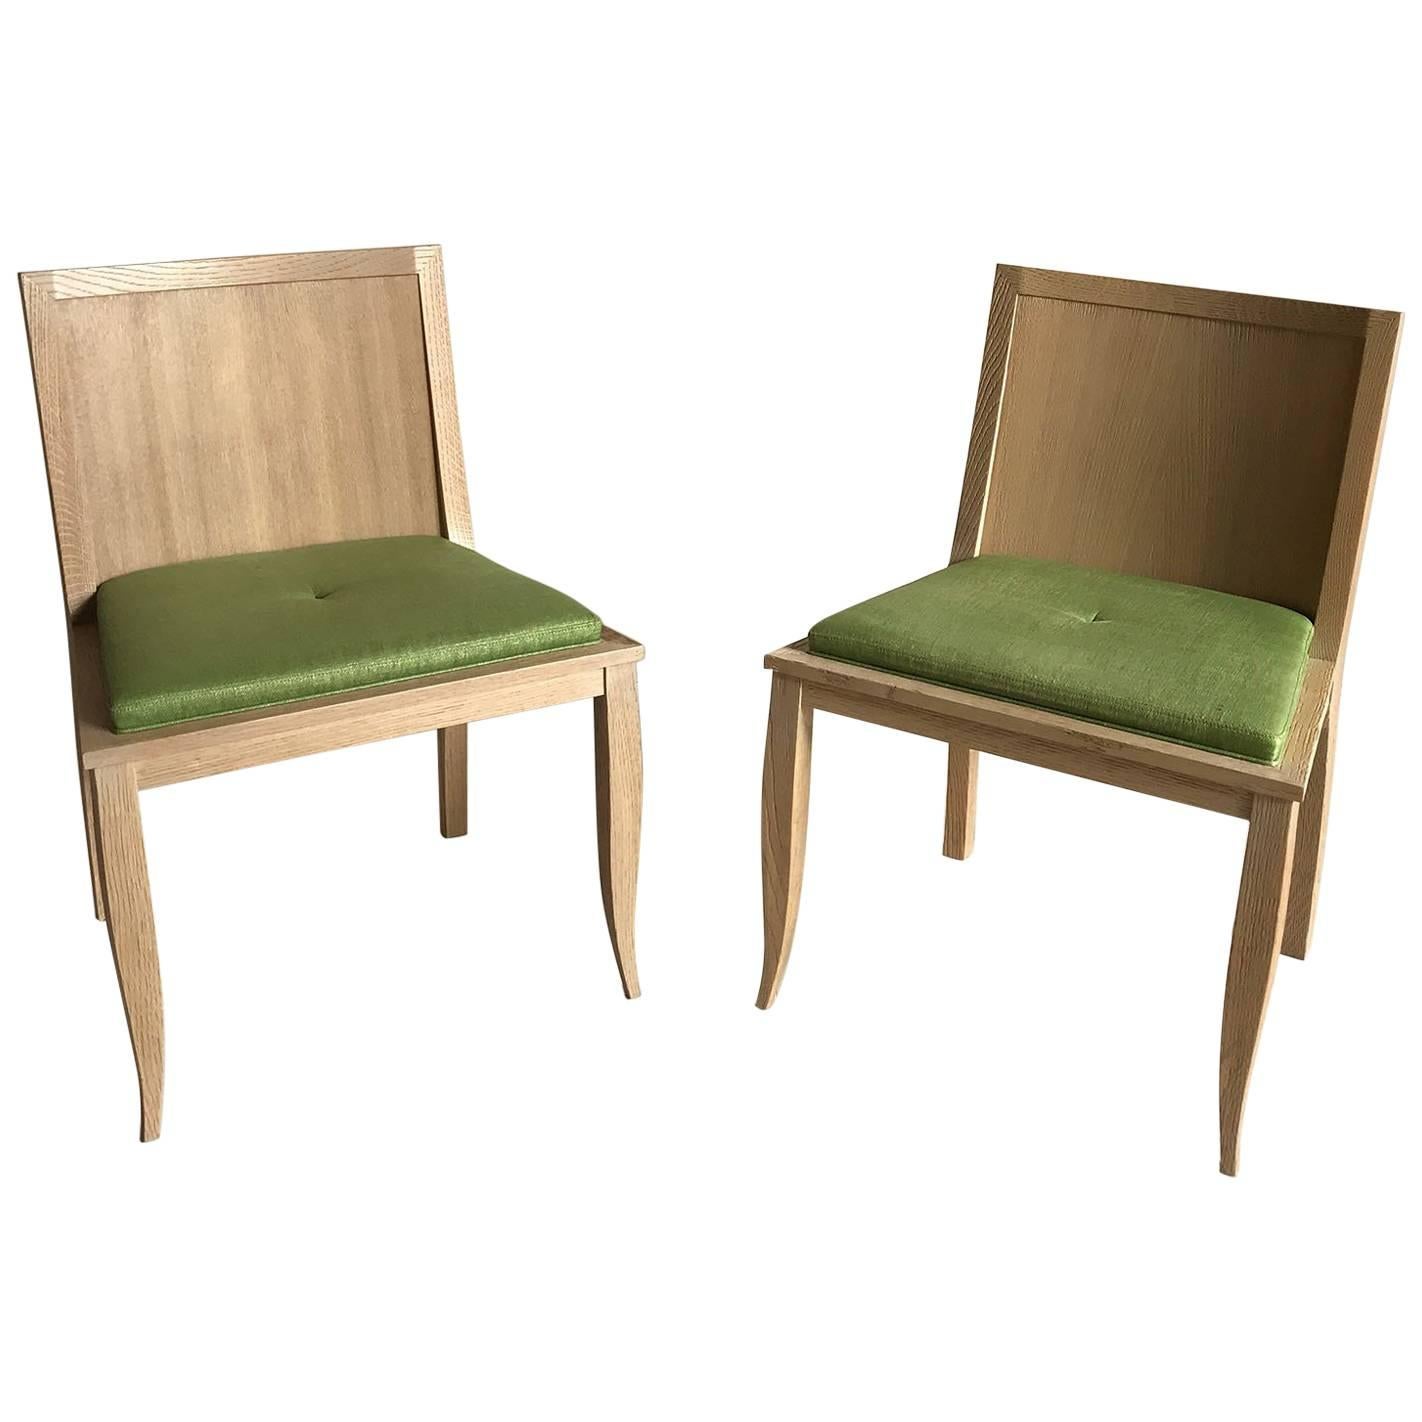 Philippe Delzers for Elitis, Pair of Chairs L'ange Bleu, France, 1998